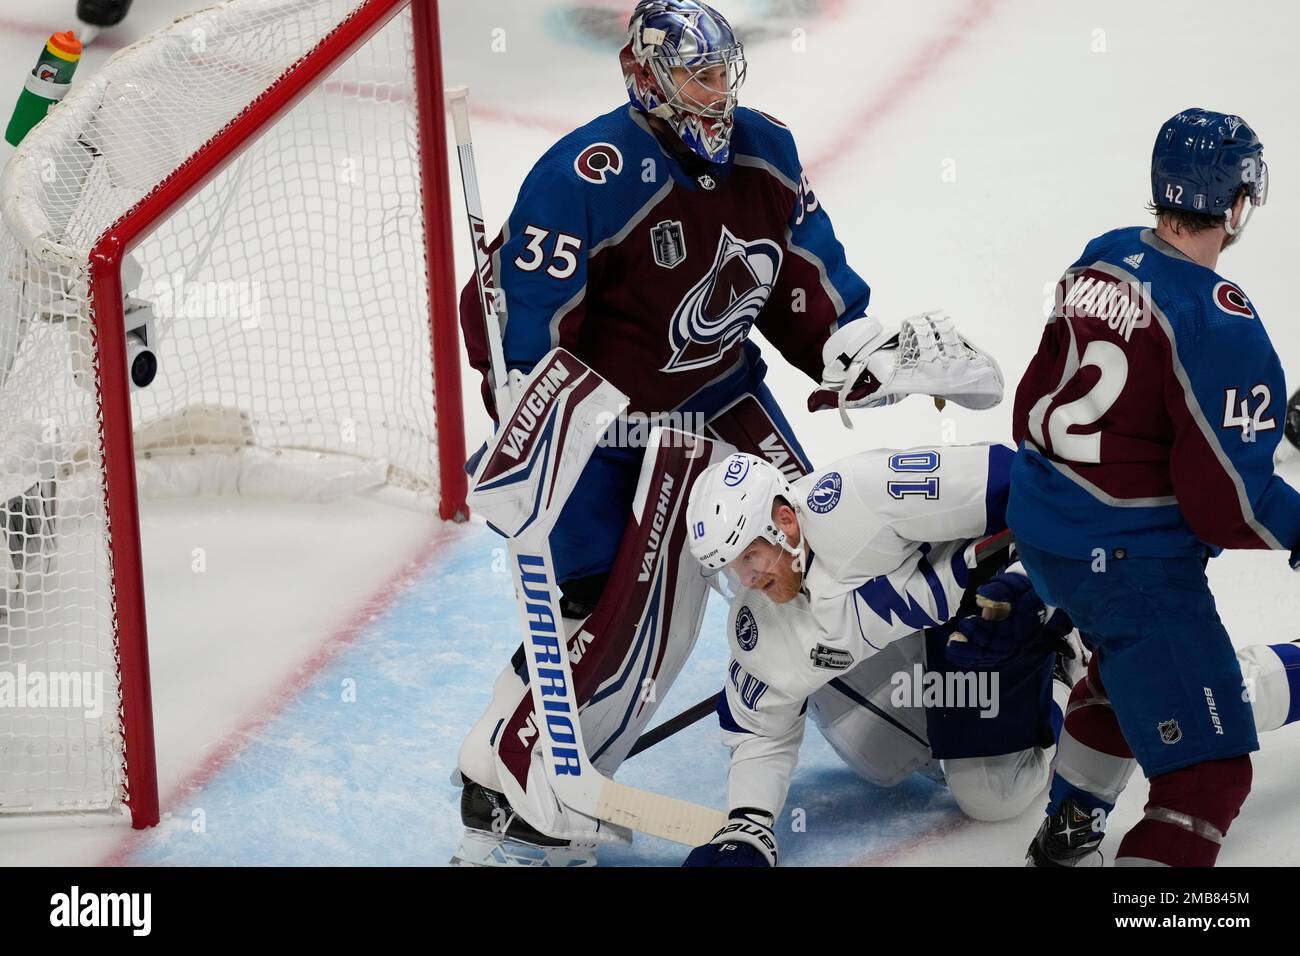 Darcy Kuemper 7, Corey Perry 0. Avalanche goalie handling Tampa